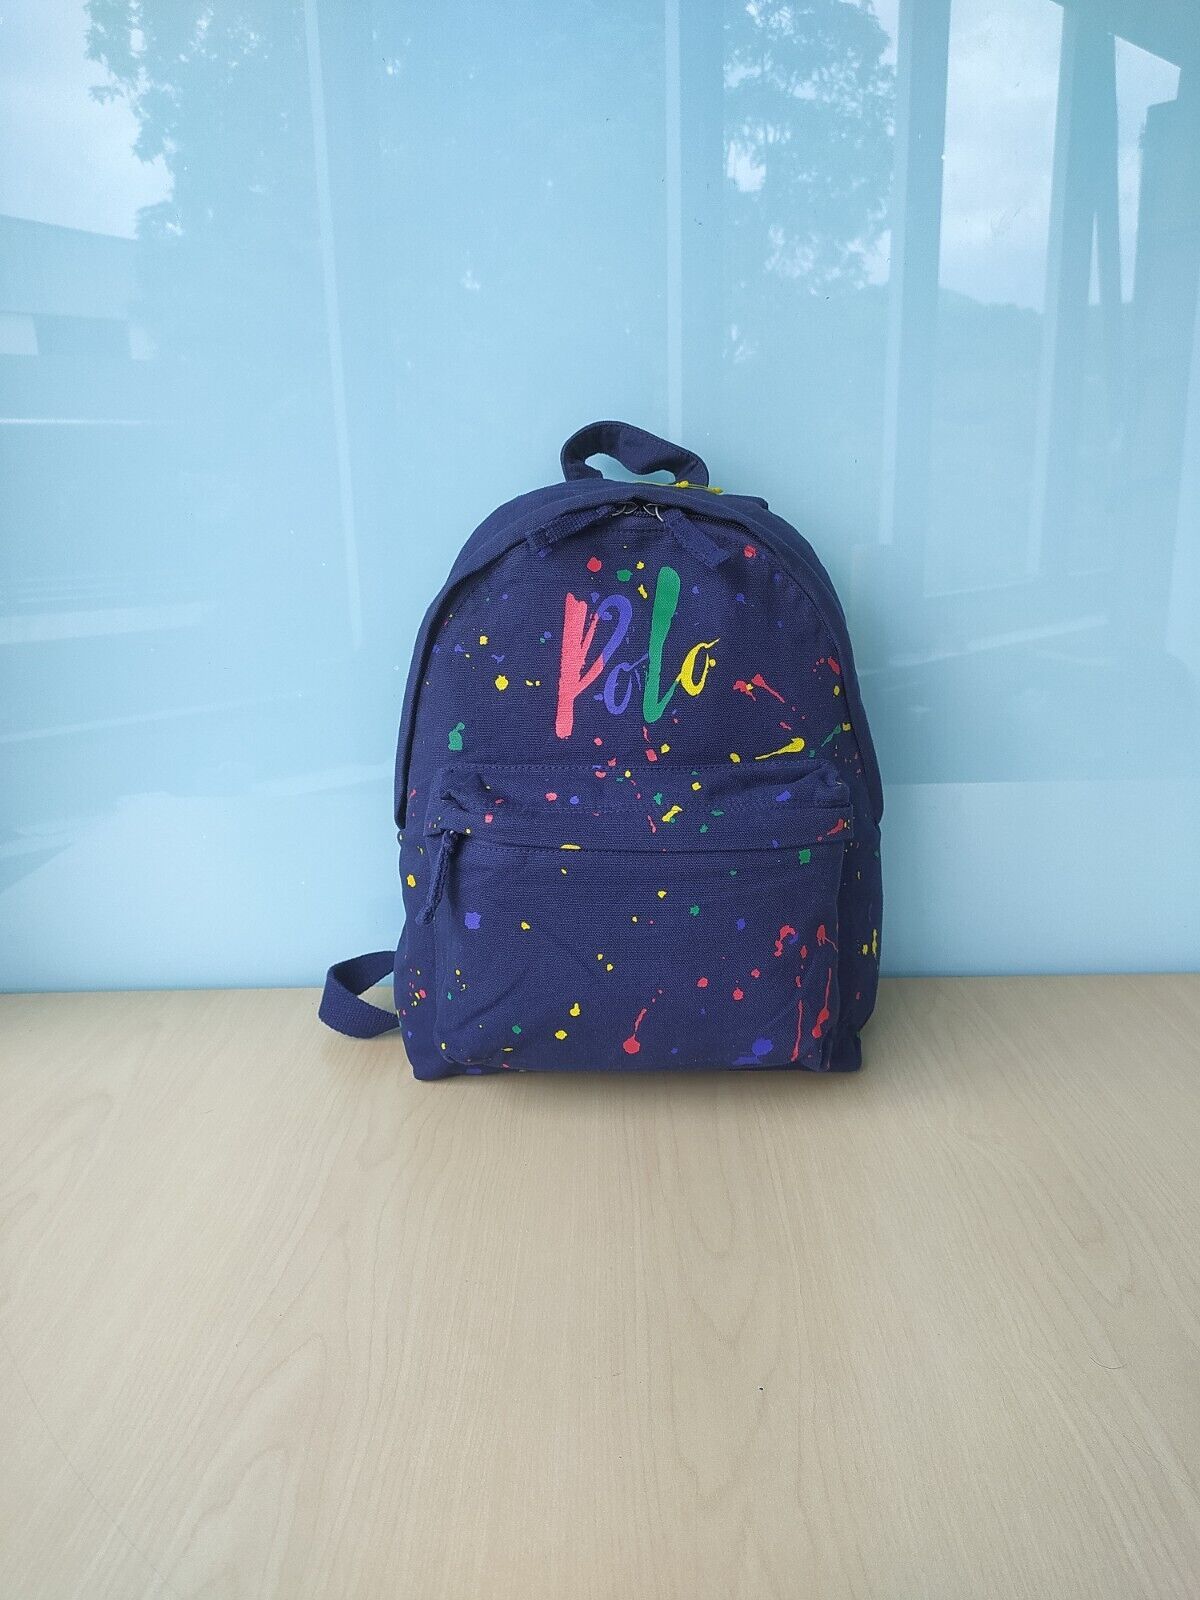 Primary image for Polo Ralph Lauren Paint Canvas Backpack  WORLDWIDE SHIPPING